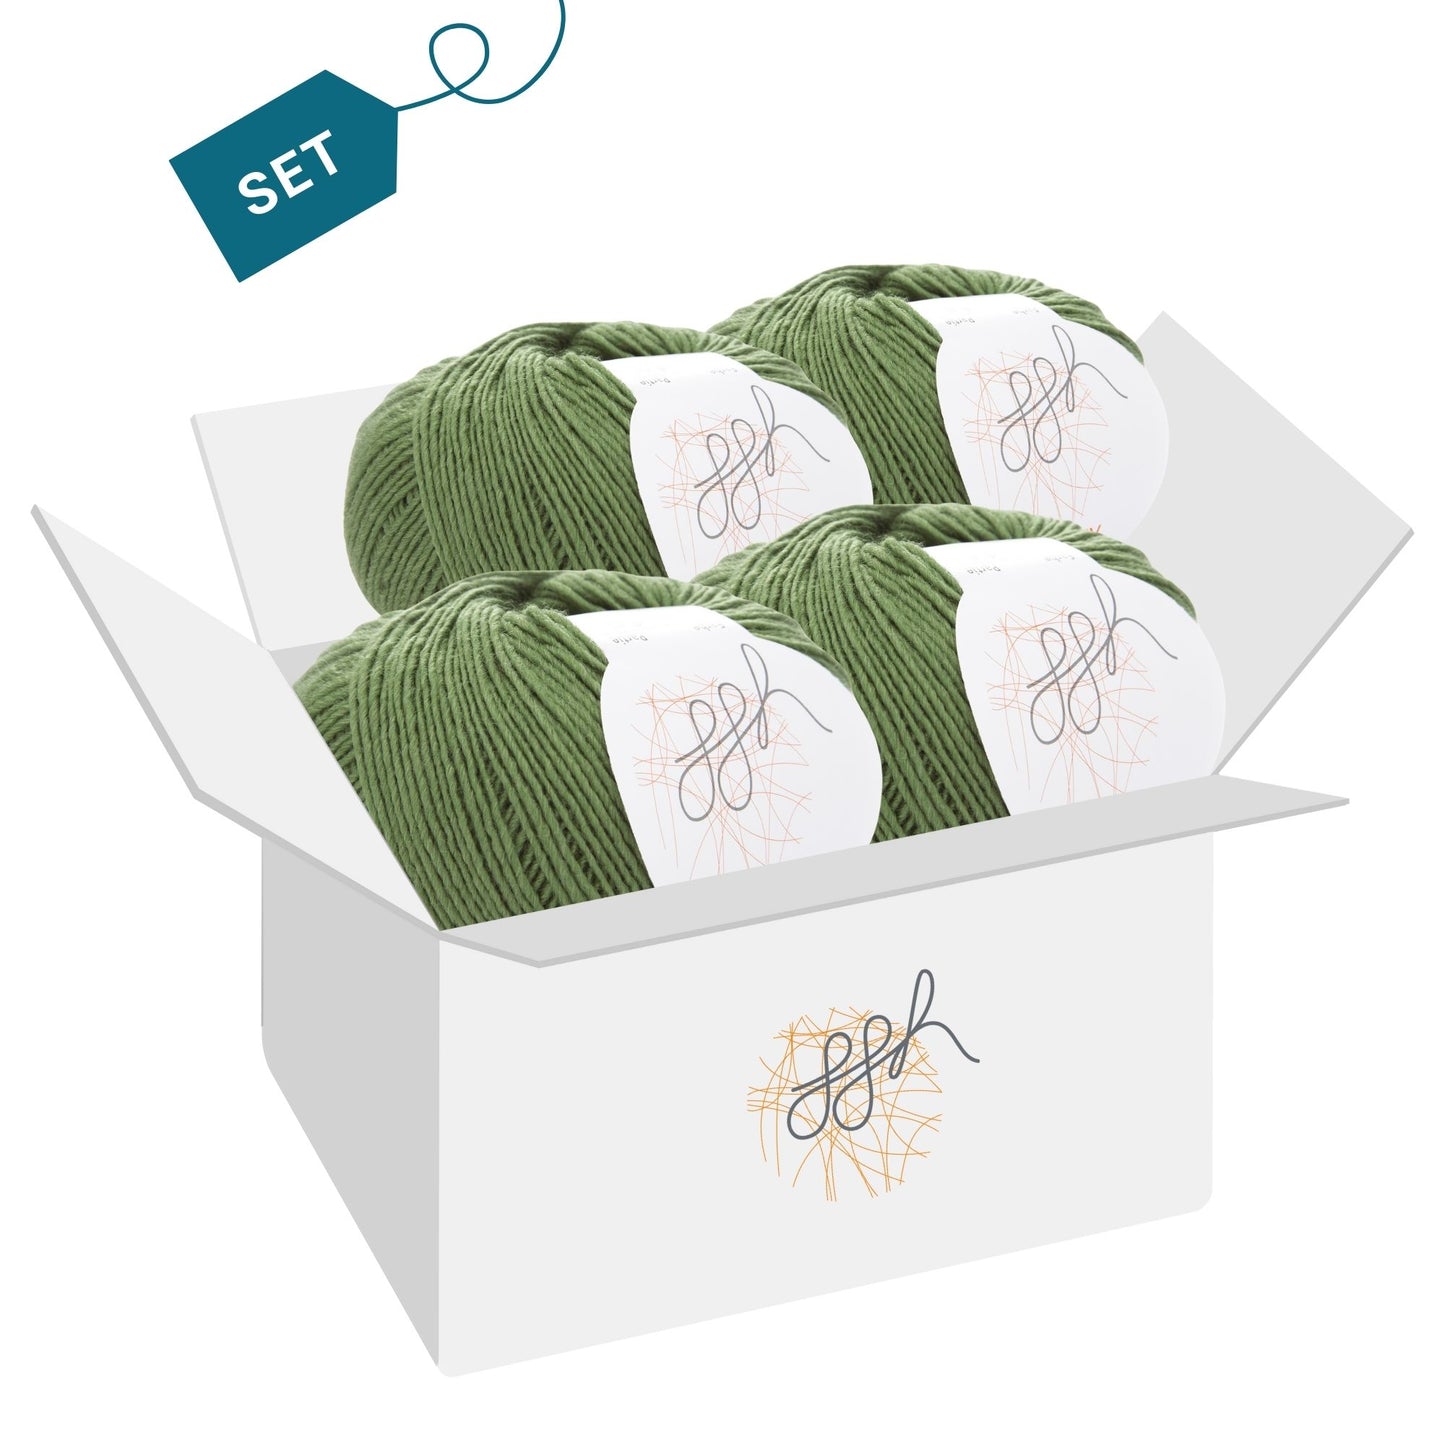 ggh Lacy | Set of 4 x 25g (total 100g) - 007 - Olive Green